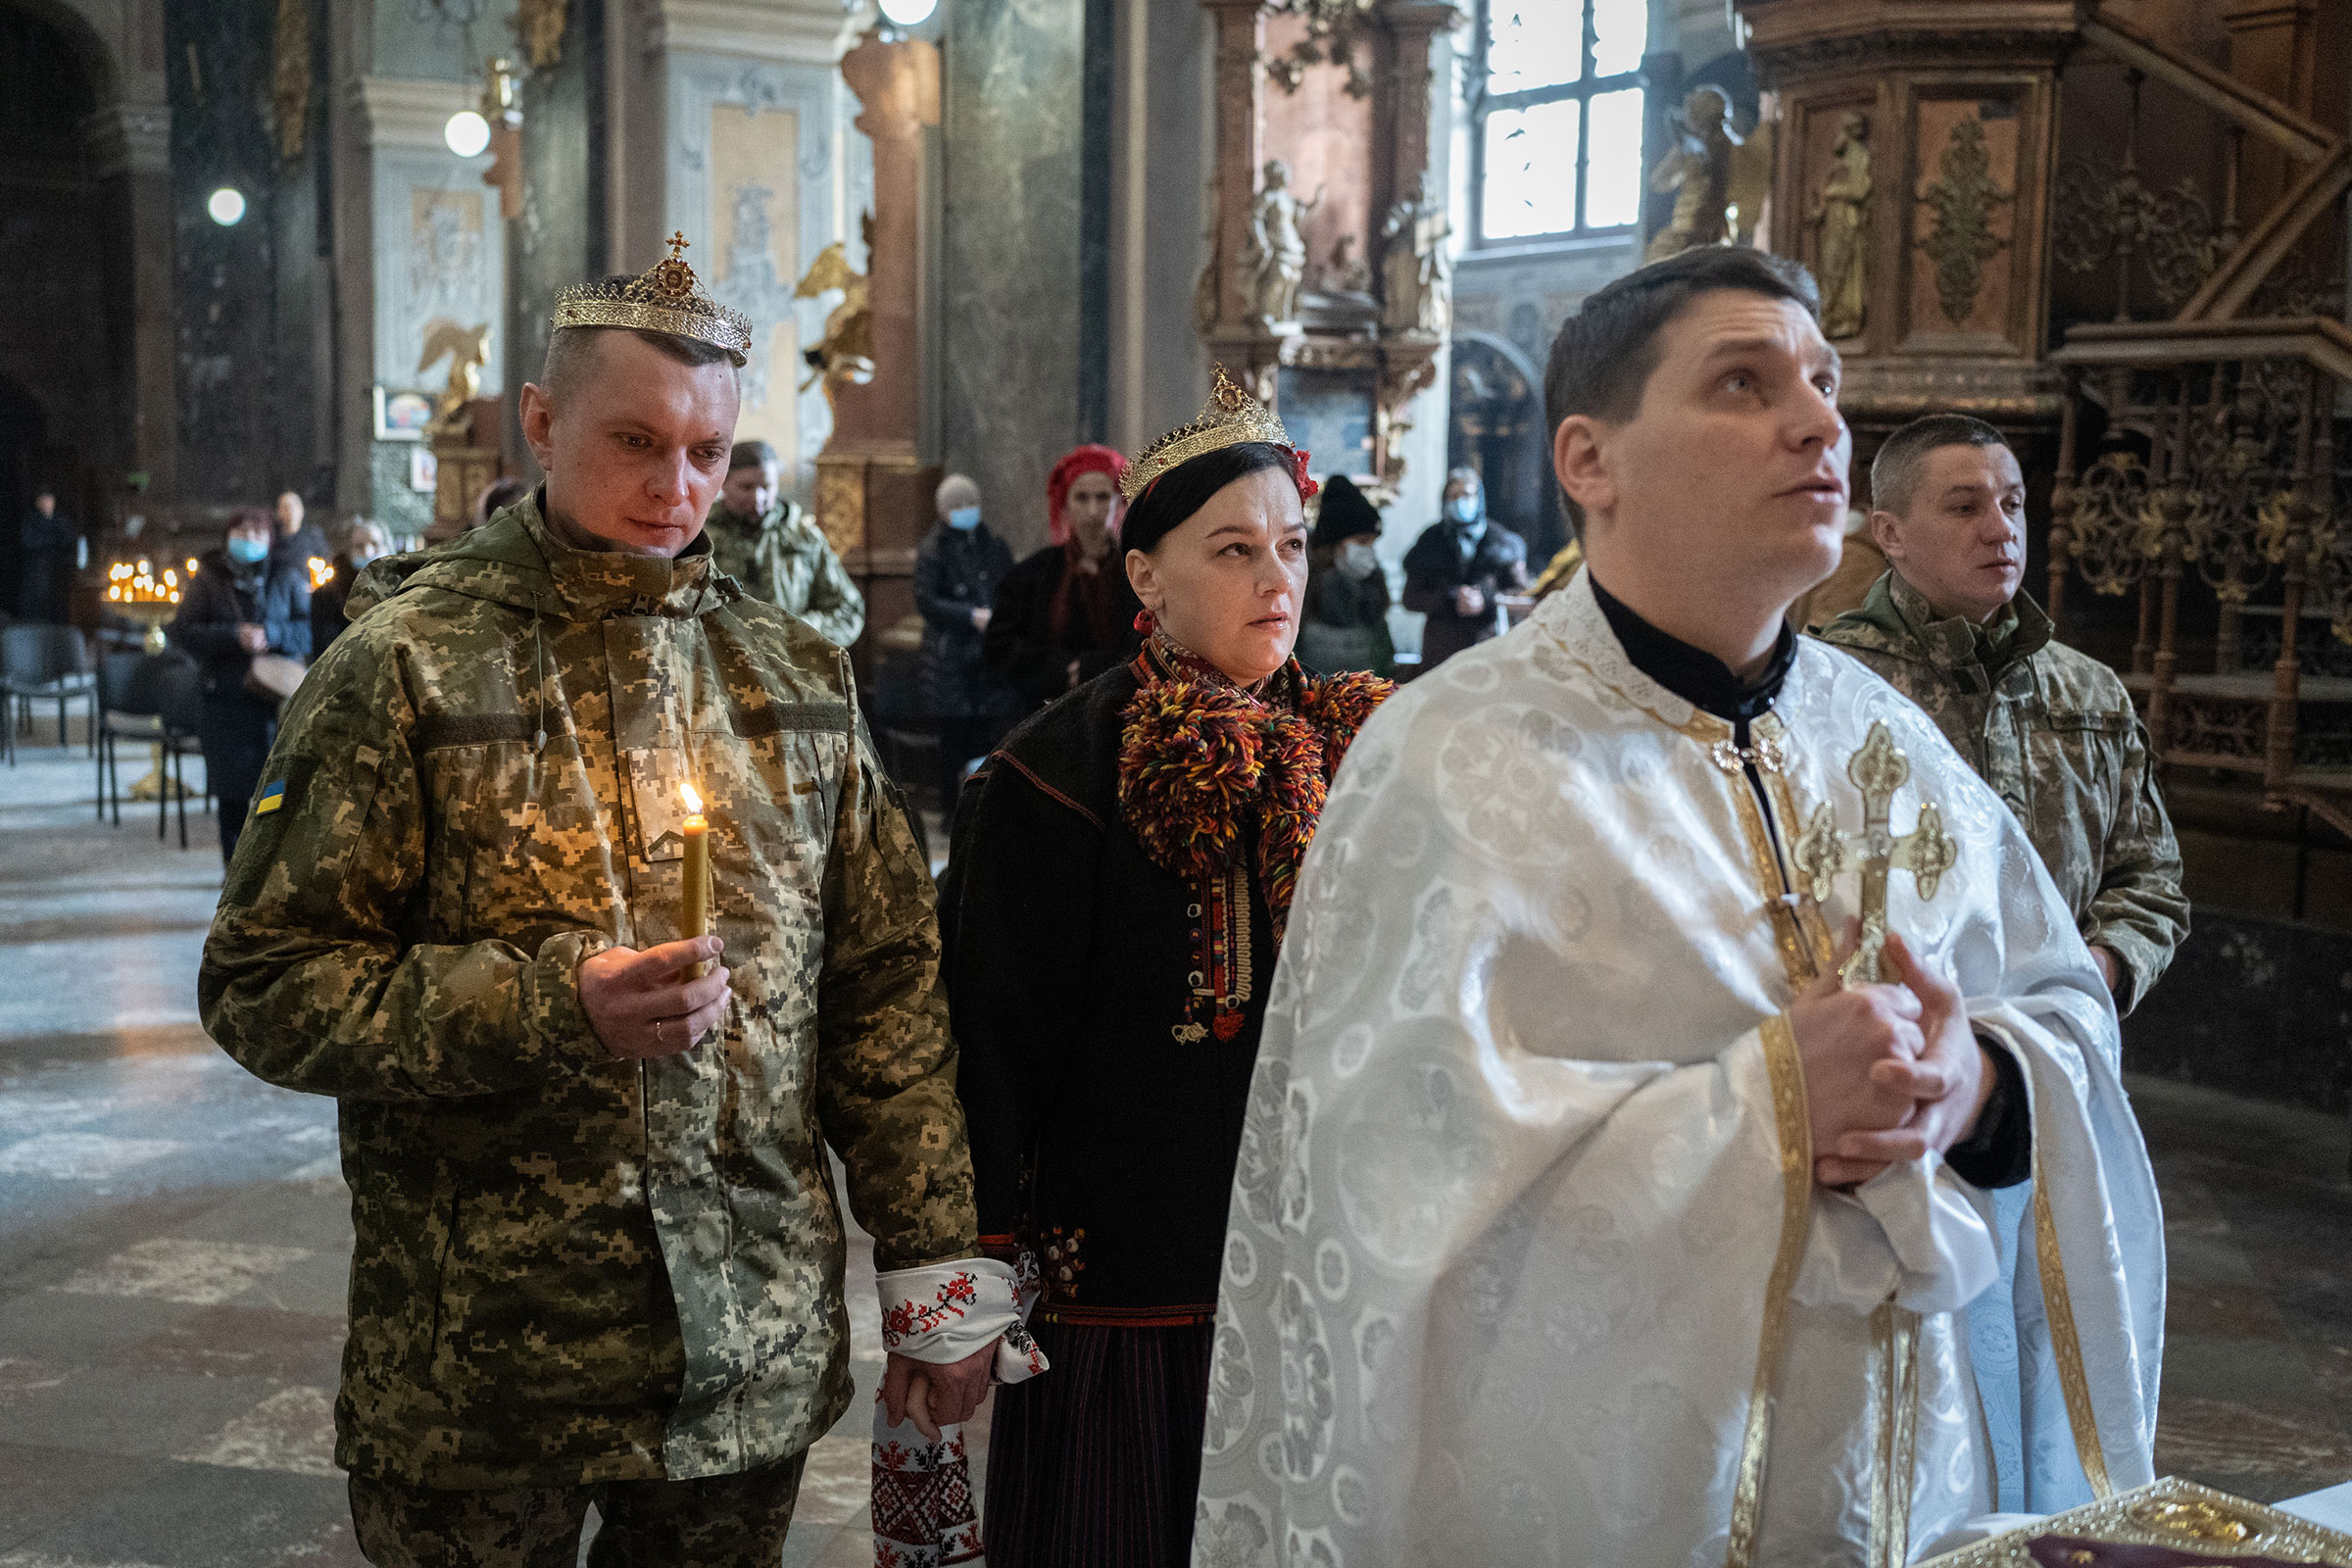 Roman, 33, soldier of the 103 Brigade of the Armed Forces of Ukraine,  marrying Iryna, 37, and baptizing their child Solomiya in the Garrison Temple in Lviv, Ukraine, on March 1, 2022. Soon, Roman might leave his family and join the combat mission to protect Ukraine from the invasion of the Russian Federation.